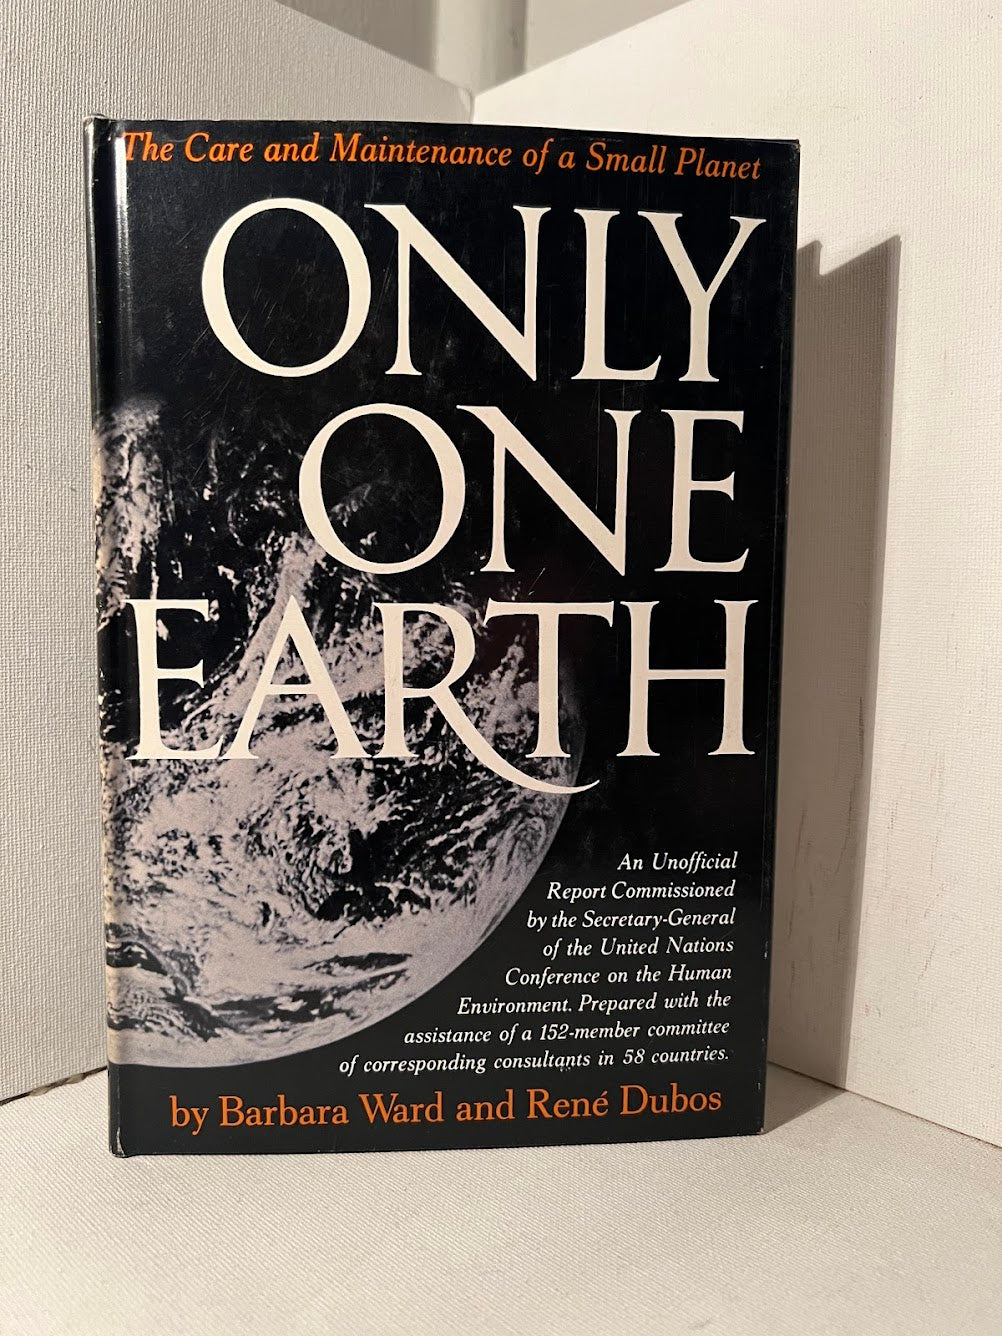 Only One Earth by Barbara Ward and Rene Dubos